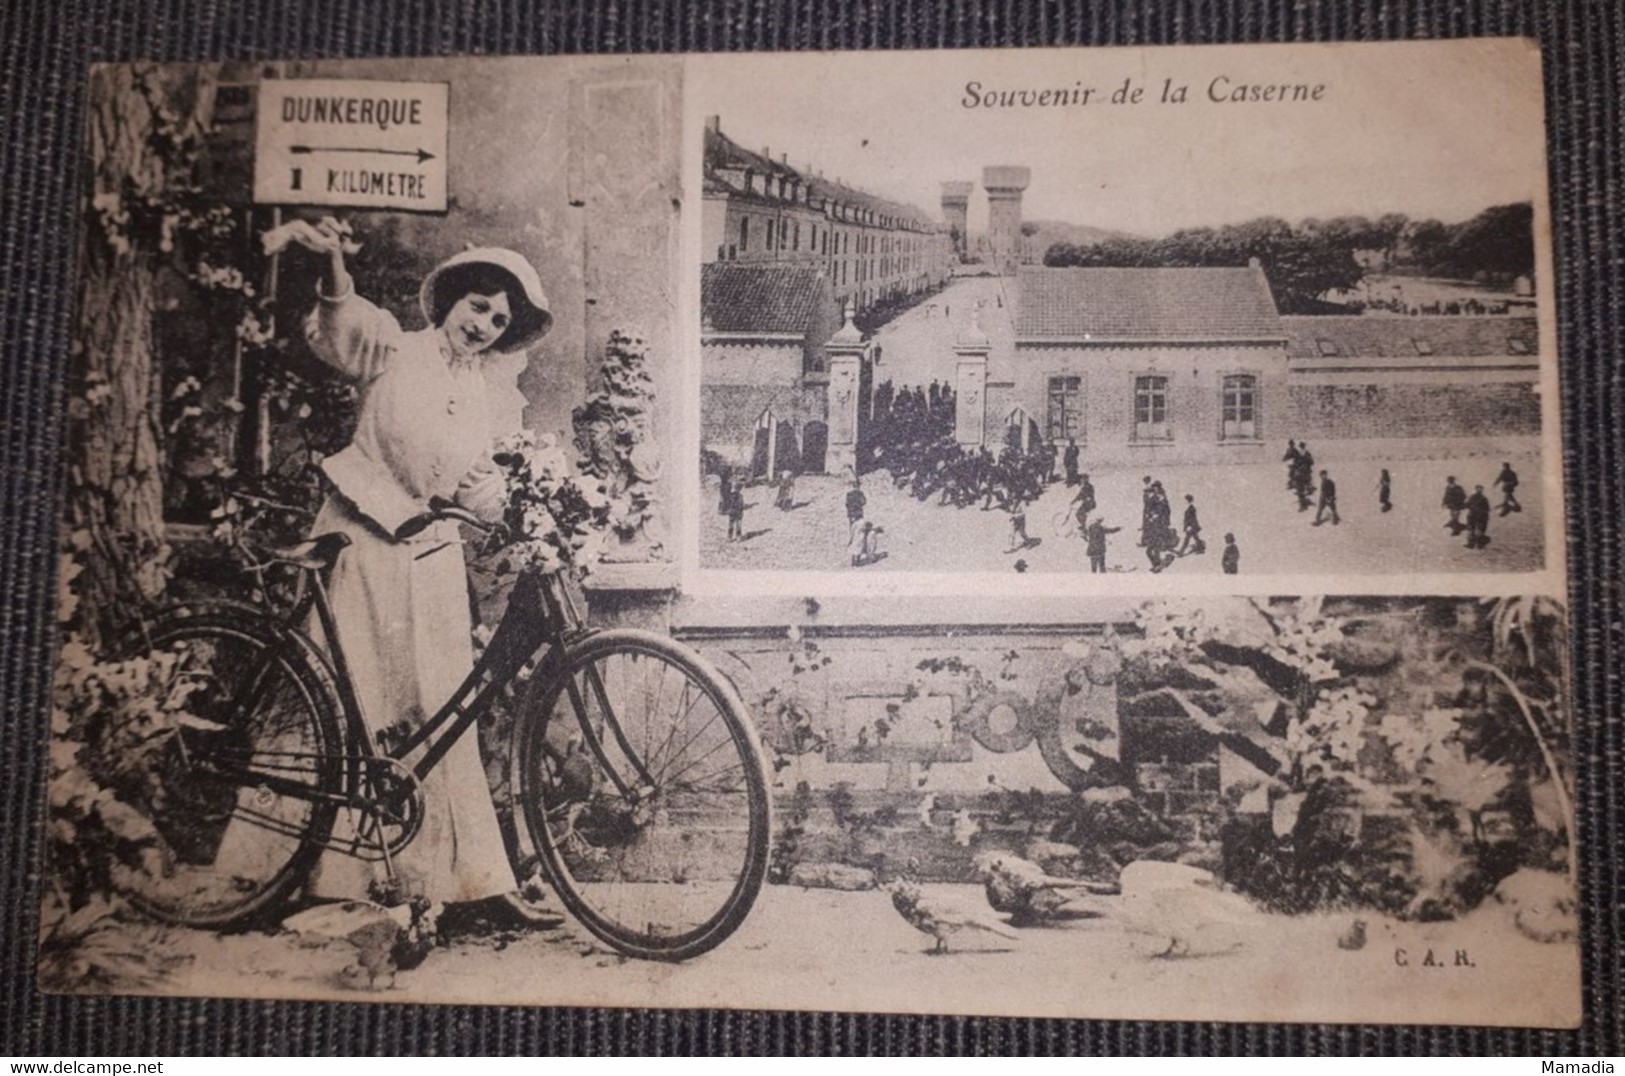 CARTE POSTALE ANCIENNE FEMME VELO CASERNE DUNKERQUE 1910-1915 - Greetings From...